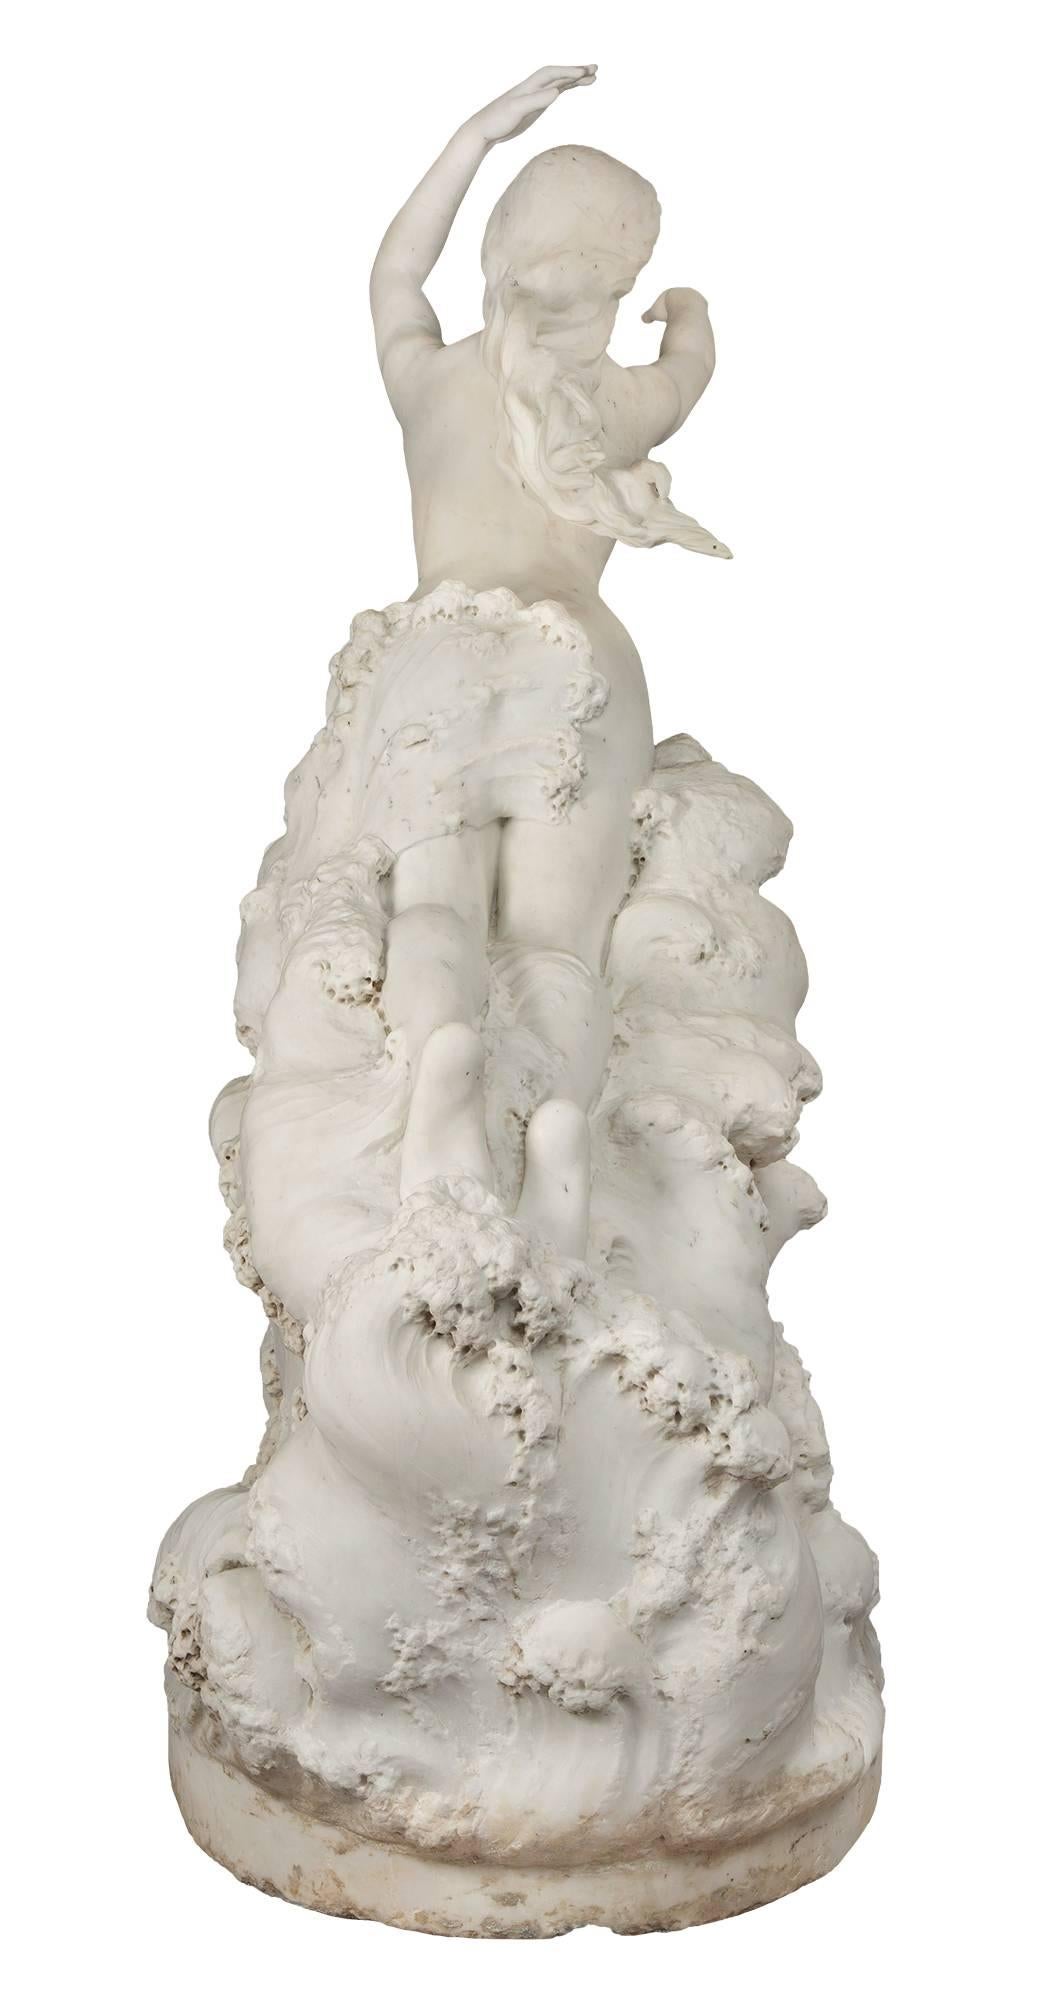 A magnificent and very unique and high quality, French, 19th century white Carrara marble statue, signed E. Damé, 1892. A nude sea nymph rising out of the ocean waves. Her arms elegantly raised with her long tresses windswept and a beautiful